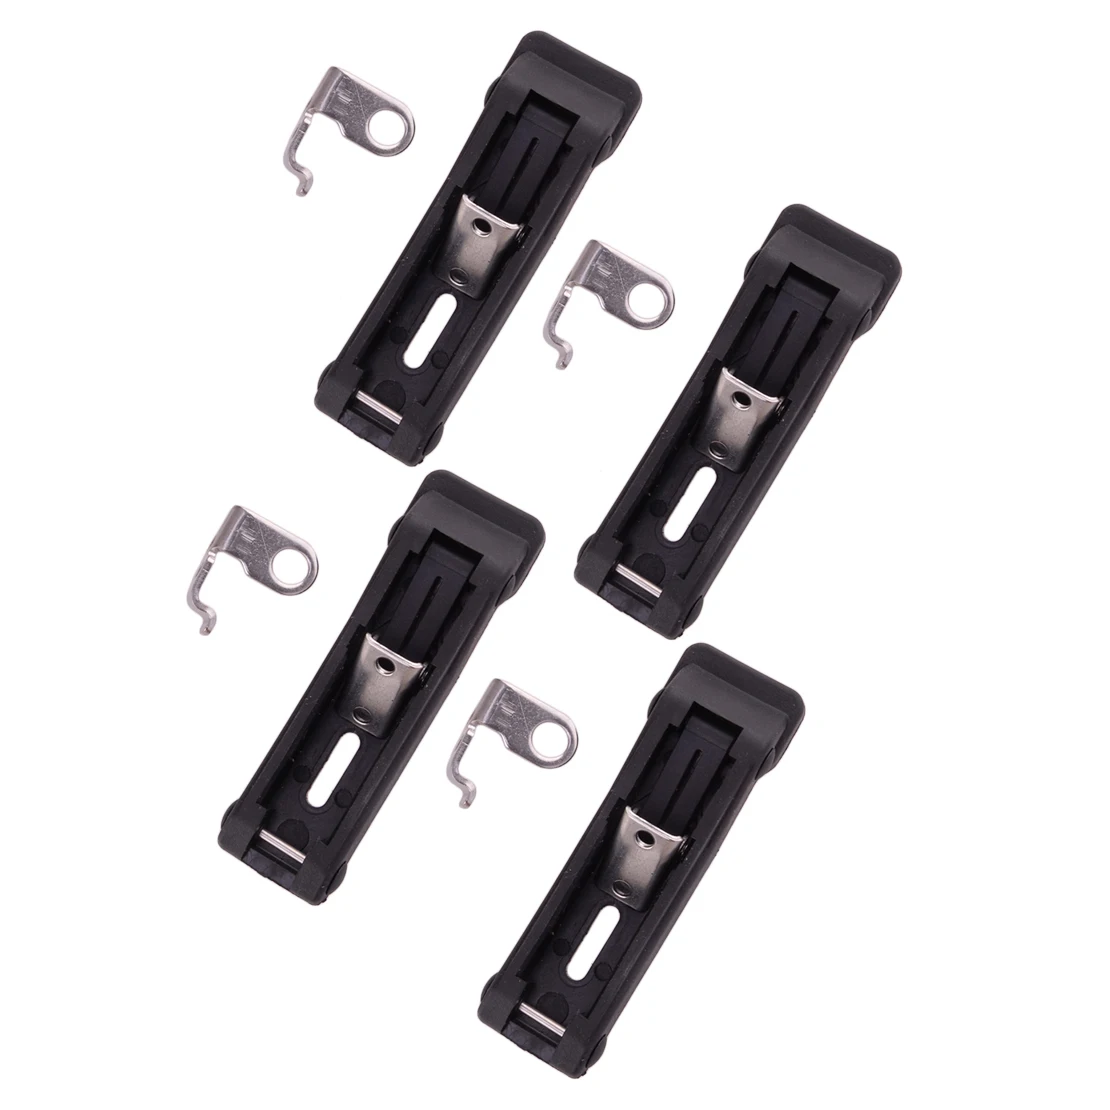 

4Pcs Rear Compartment Hatch Latch Lock Clamp F2SU264L0100 Fit for Yamaha PWC WAVERUNNER FX CRUISER SHO FA1800AM LIMITED SVHO